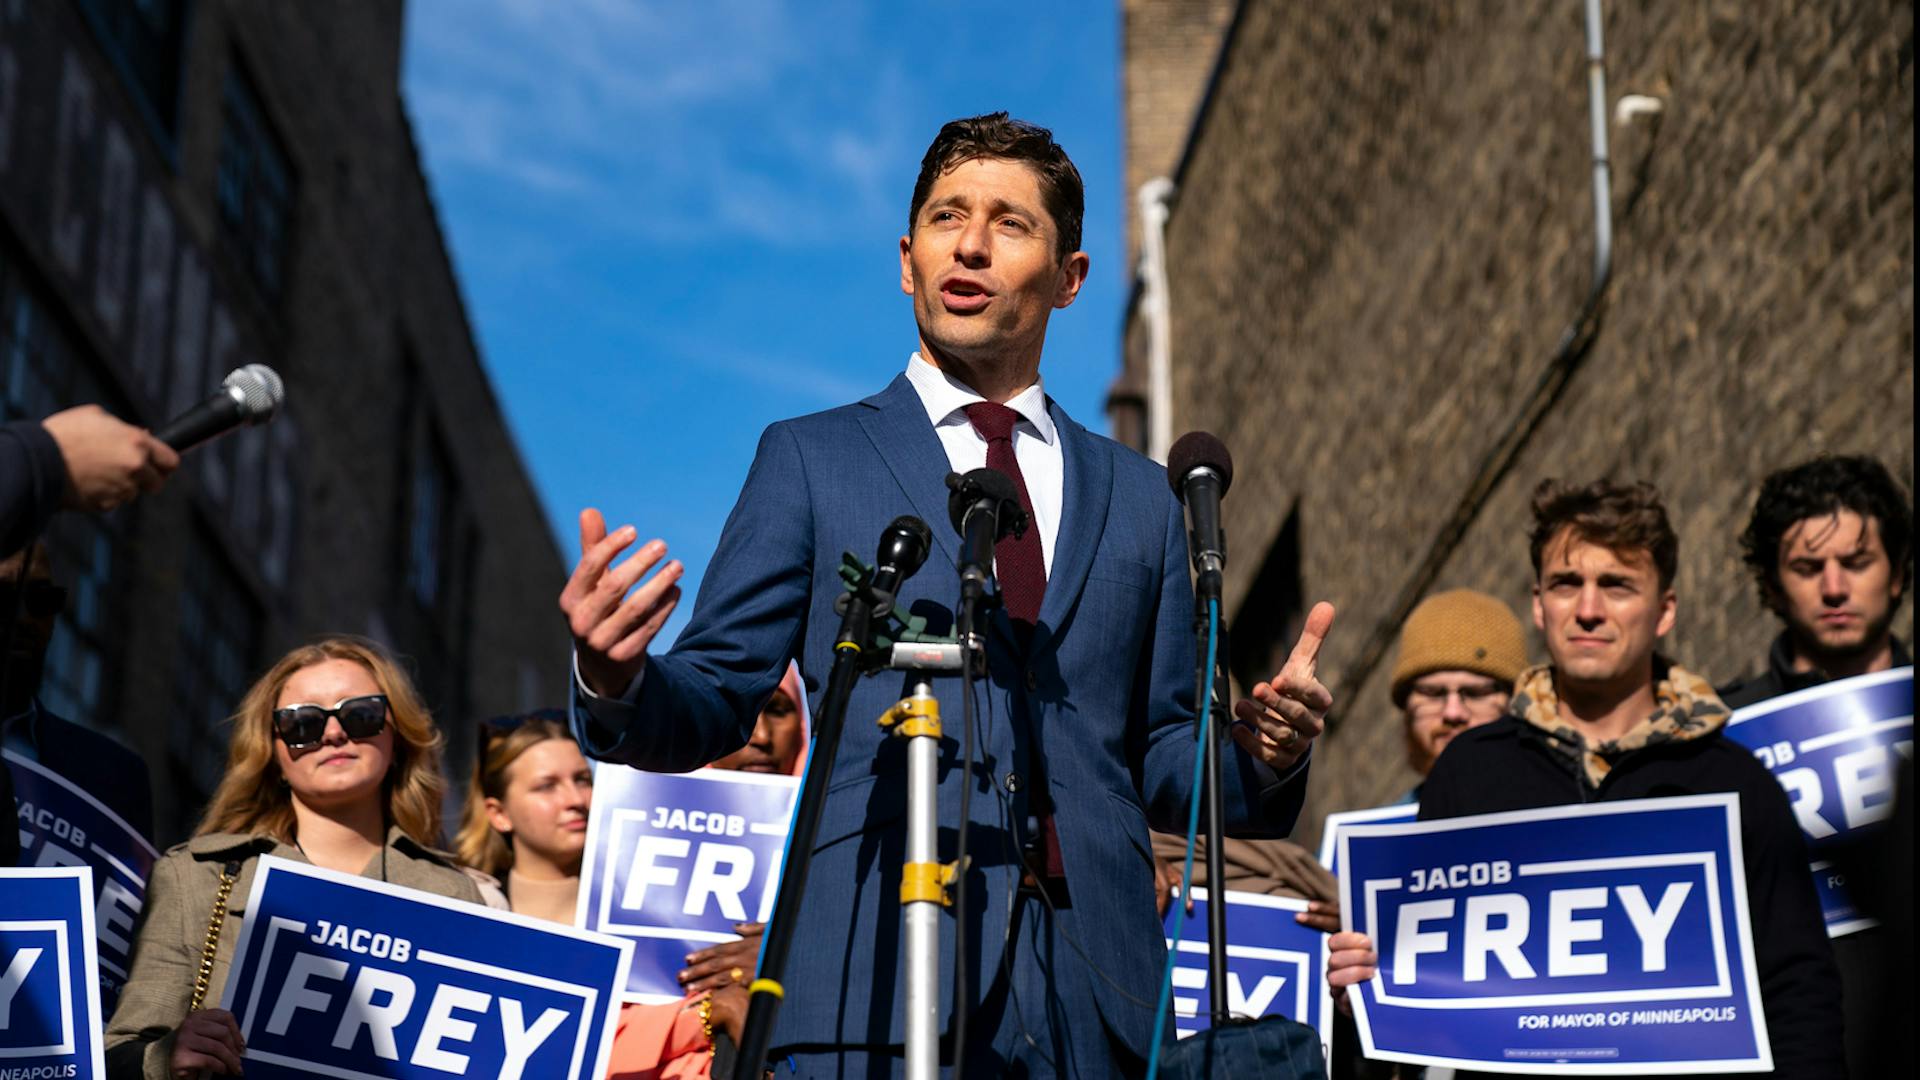 After being re-elected, Minneapolis Mayor Jacob Frey says the new system of city government requires partnership in good faith to create true reform and change.